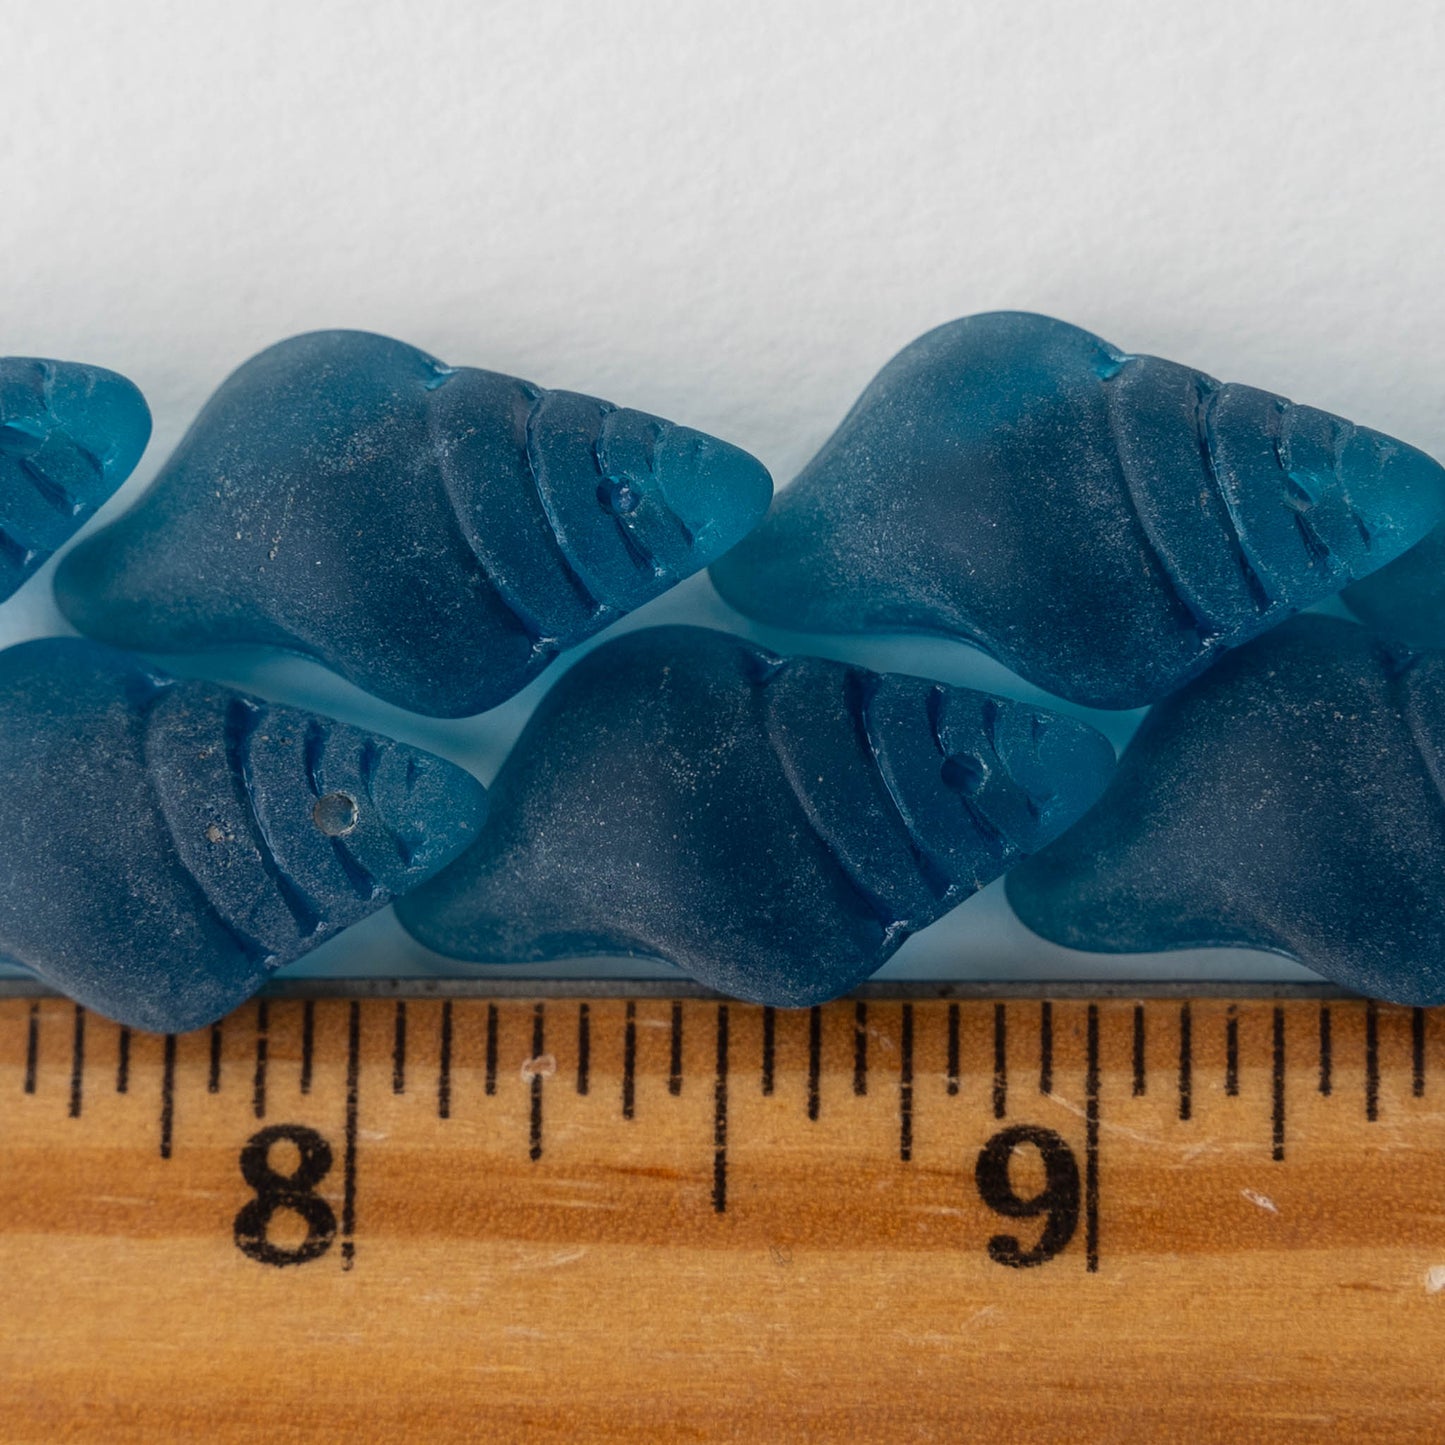 12x26mm Frosted Glass Conch Shell Beads - Teal - 2 Beads